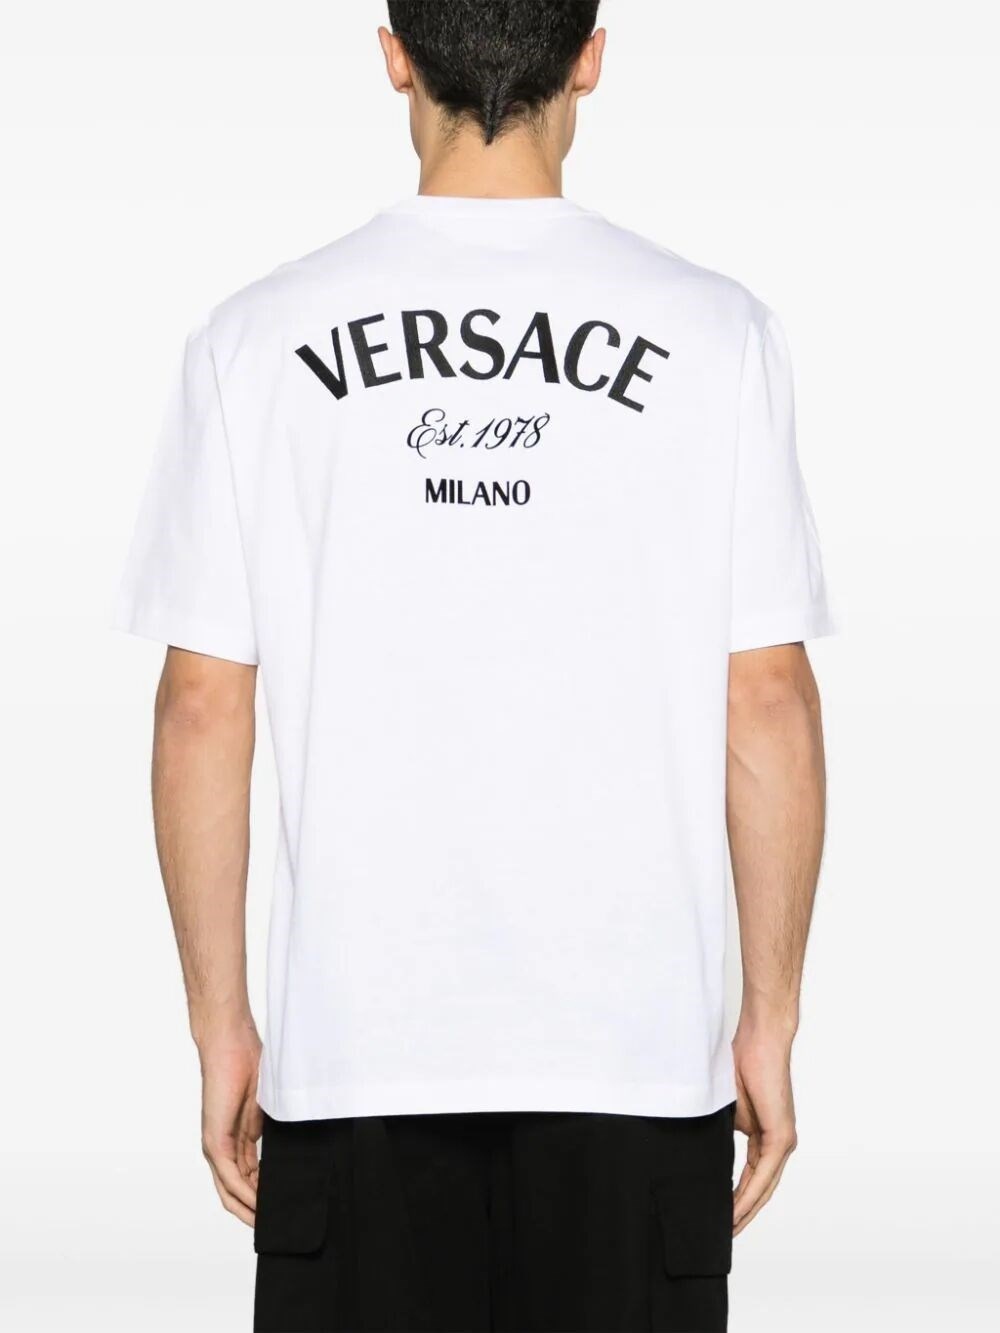 `Versace` Embroidery And `Versace Milano` Stamp Print T-Shirt - 5